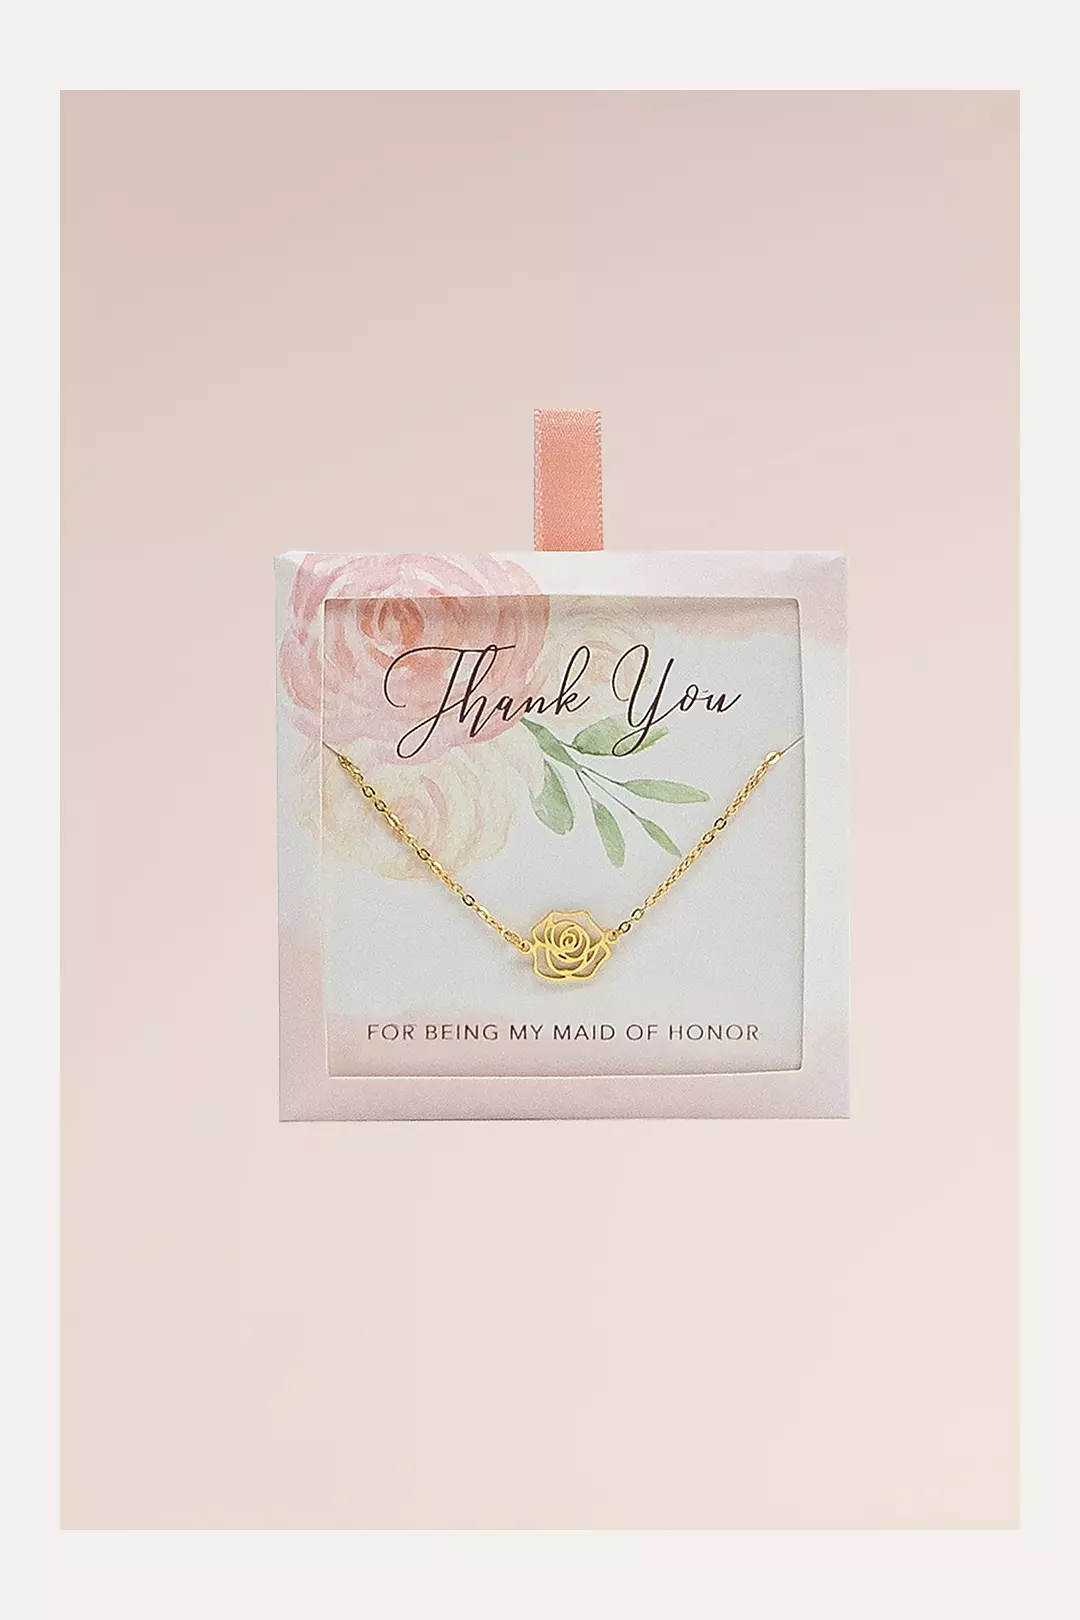 Thank You for Being My Maid of Honor Rose Necklace Image